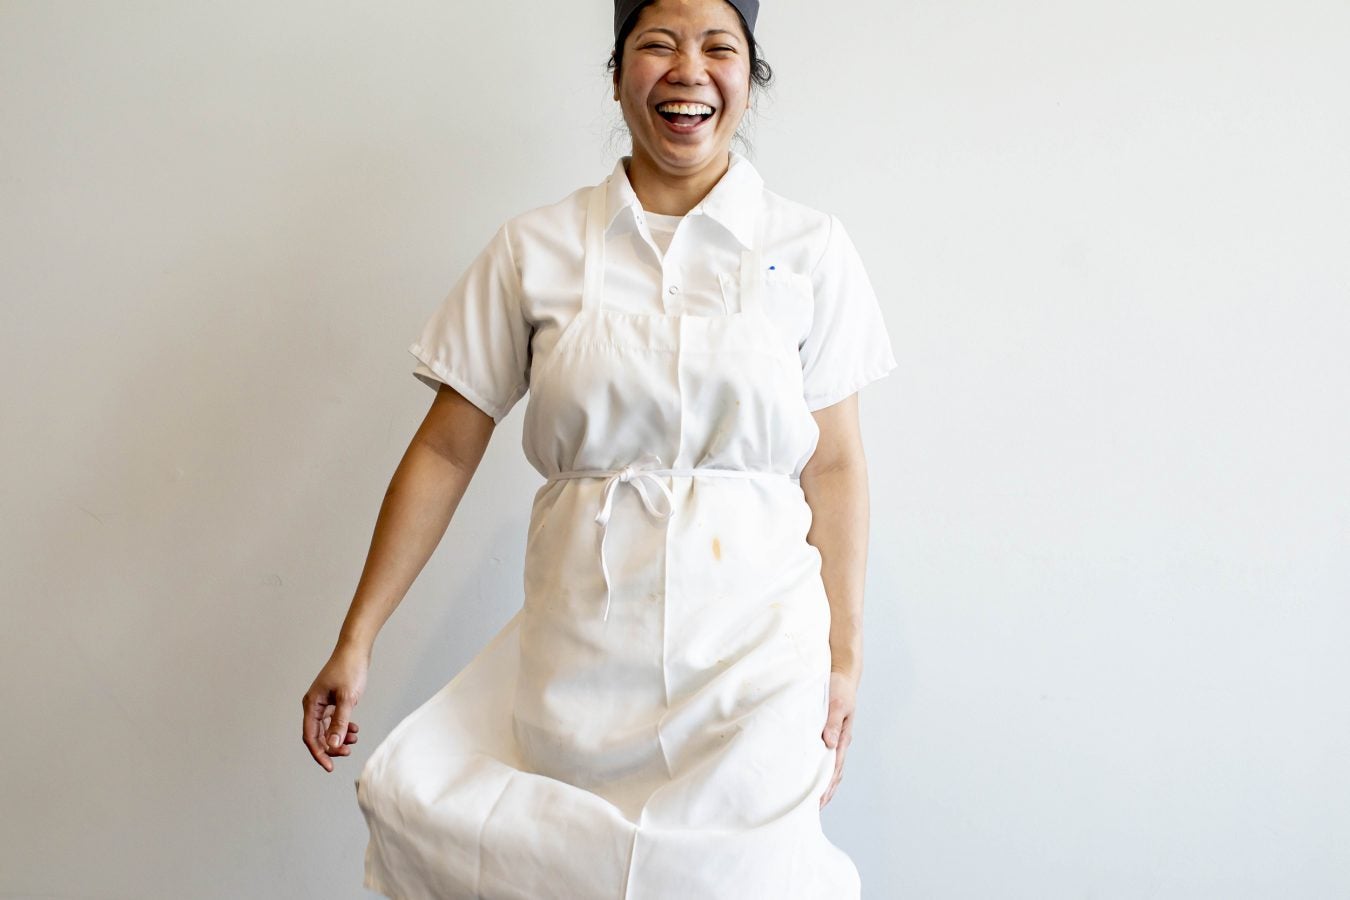 Mariel Tayag is a chef at the Heights, the restaurant on the 10th floor of the Smith Campus Center.